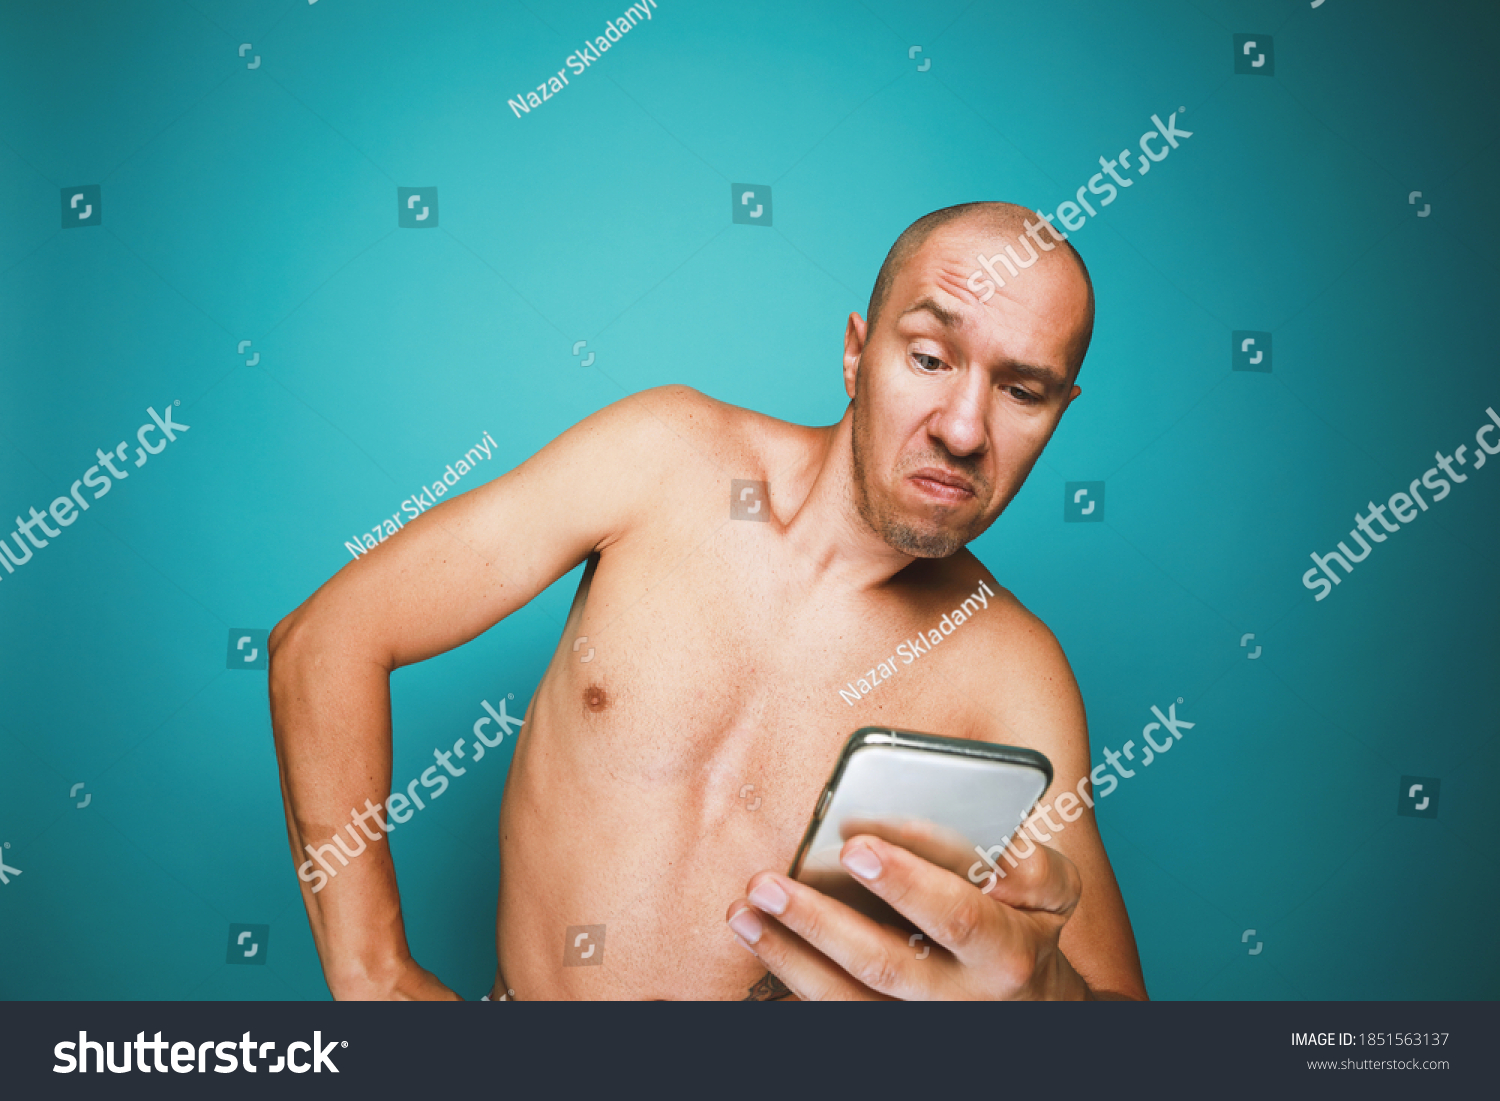 Funny Bald Naked Man Emotions Holds Stock Photo Edit Now